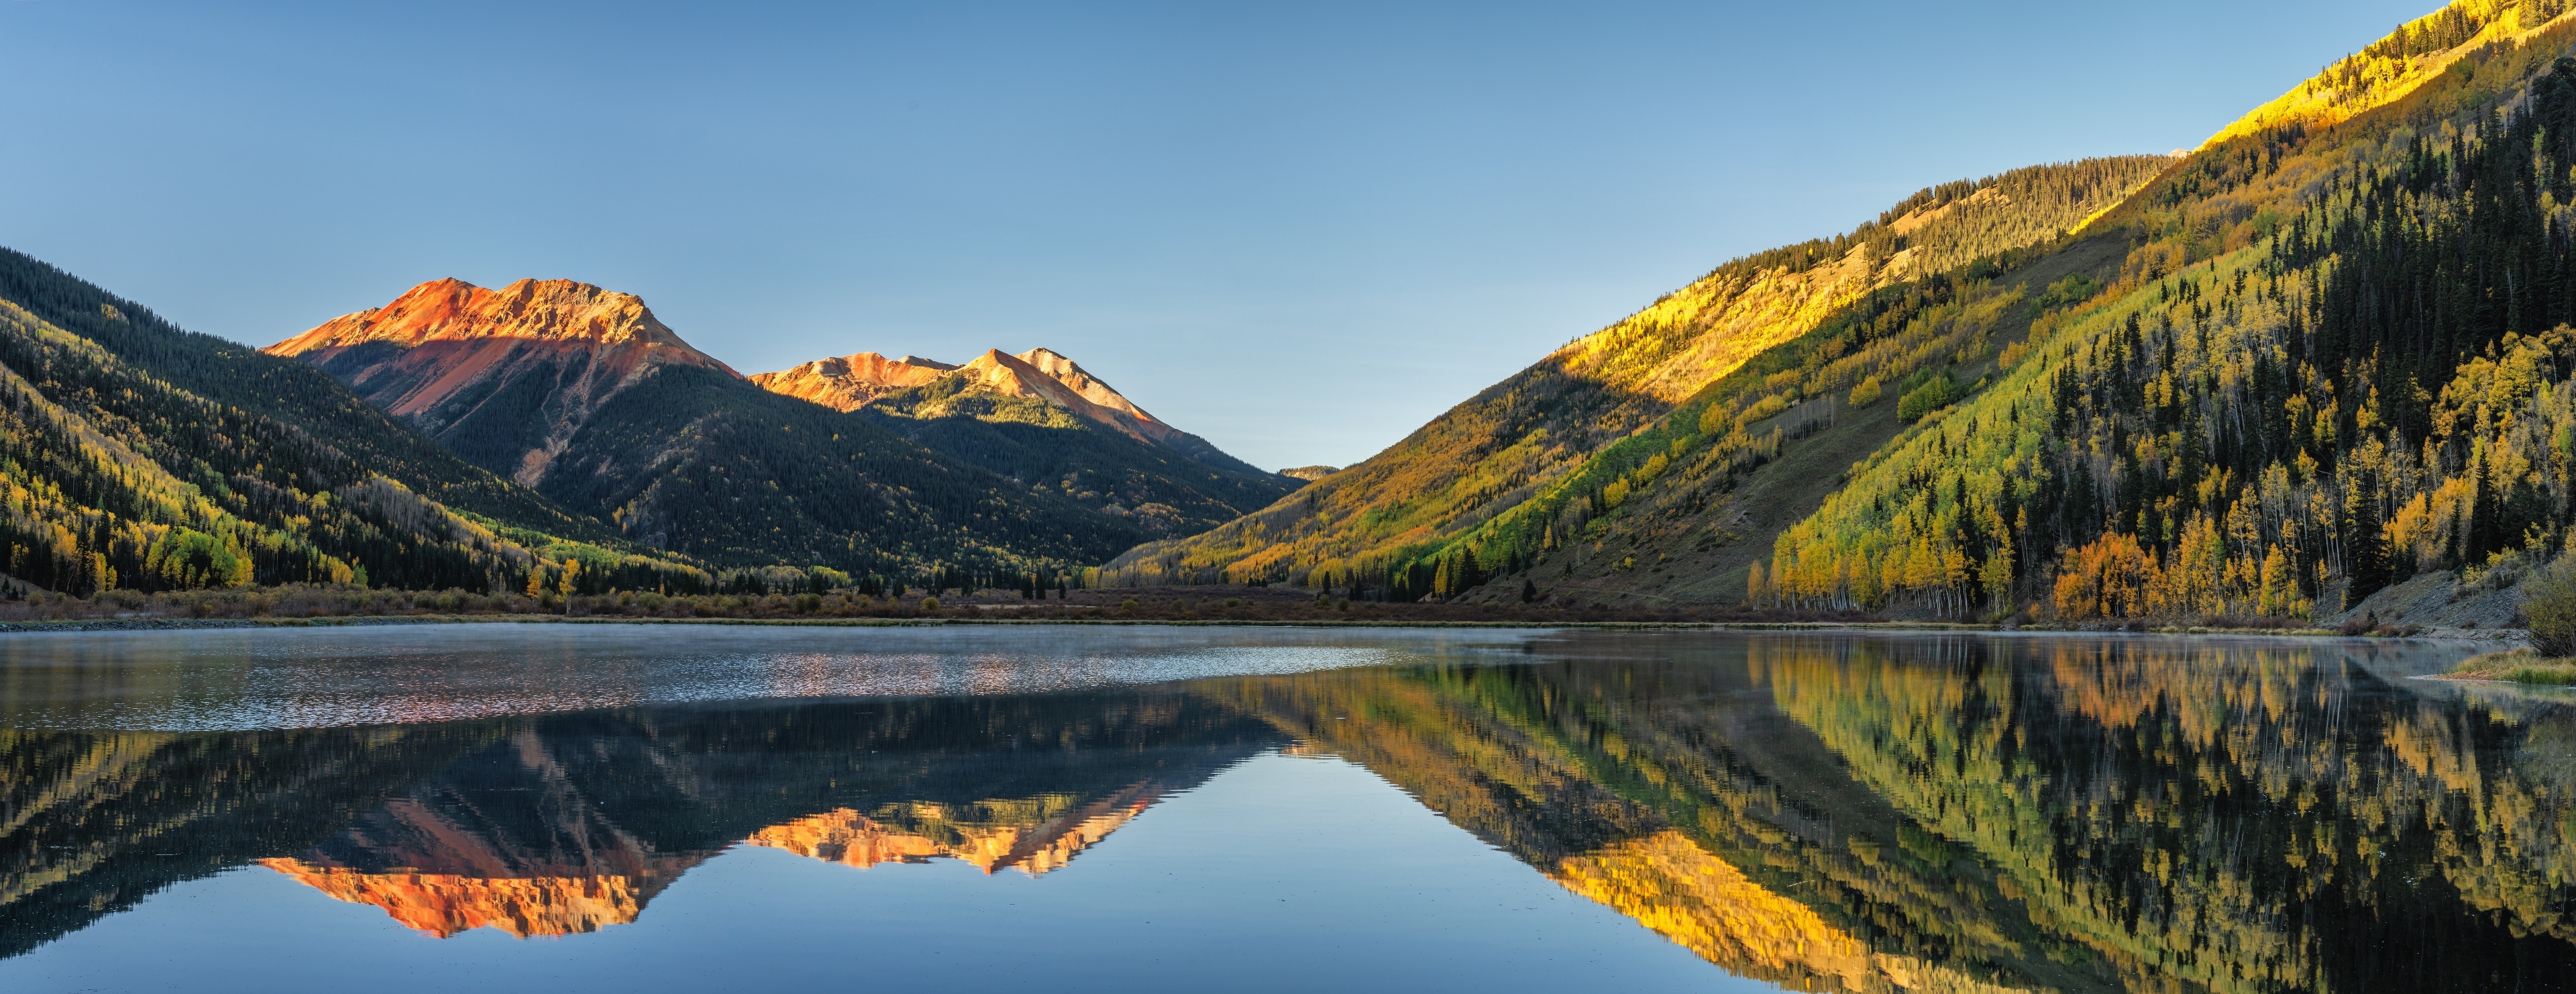 Ouray County, Colorado, United States of America